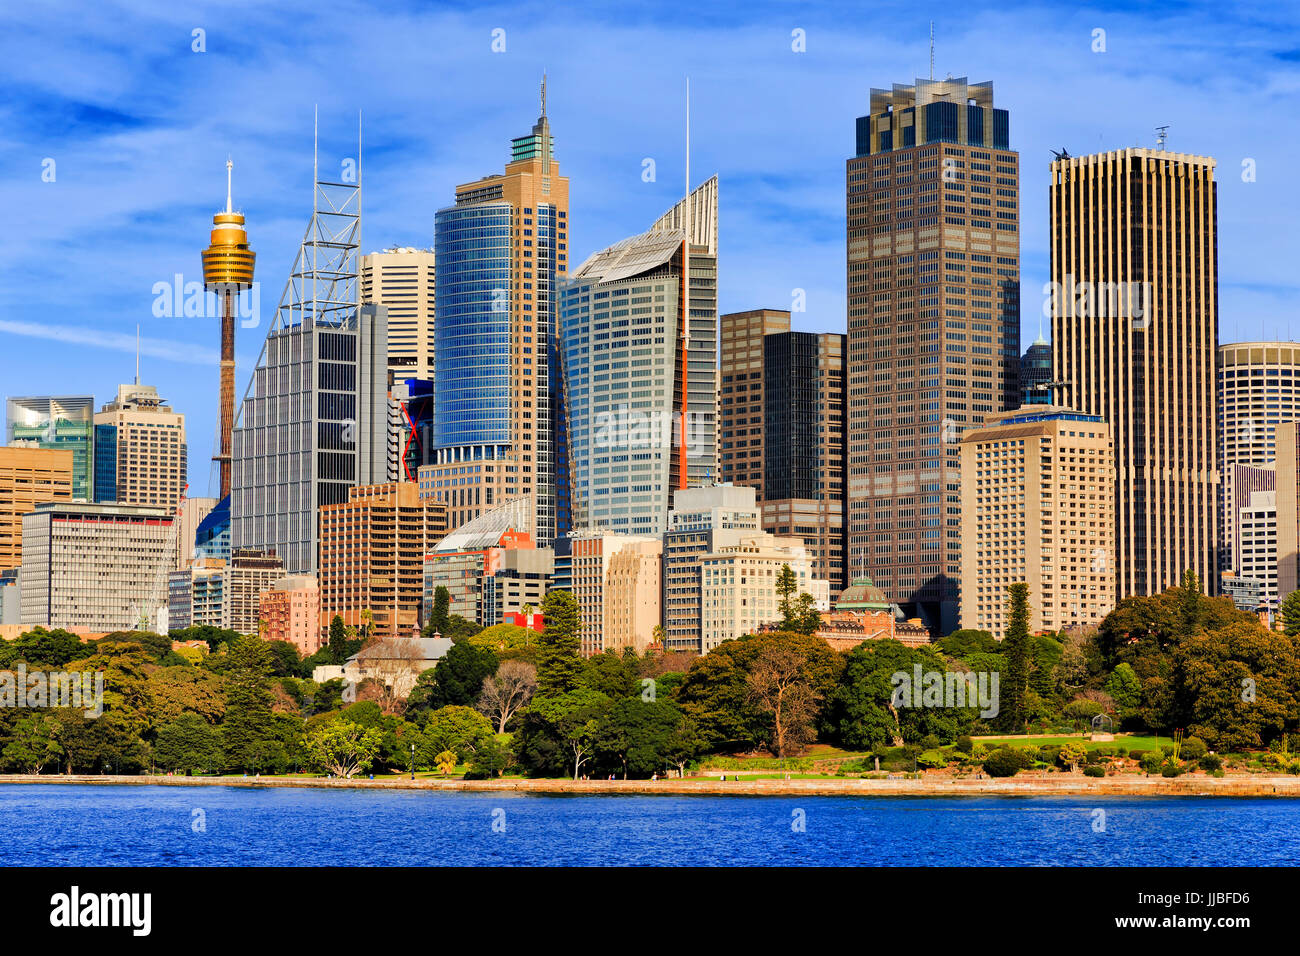 Tall towers of high-rise office buildings in Sydney city CBD standing above the Royal Botanic Gardens as seen from Sydney Harbour on a sunny day. Stock Photo